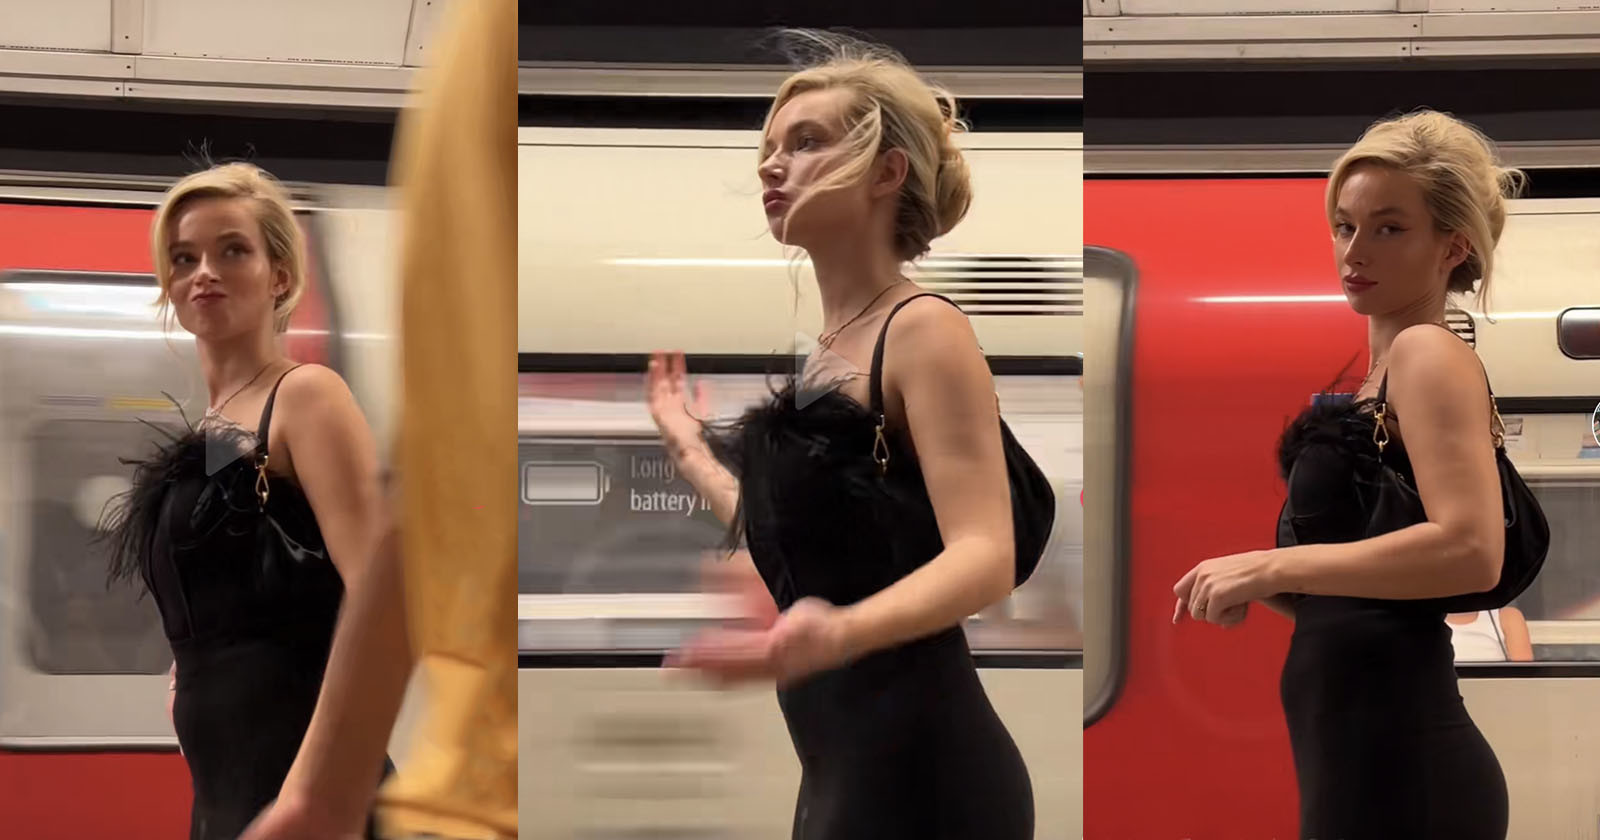 Model Enraged by People Walking into Her Shot is Ridiculed by Social Media